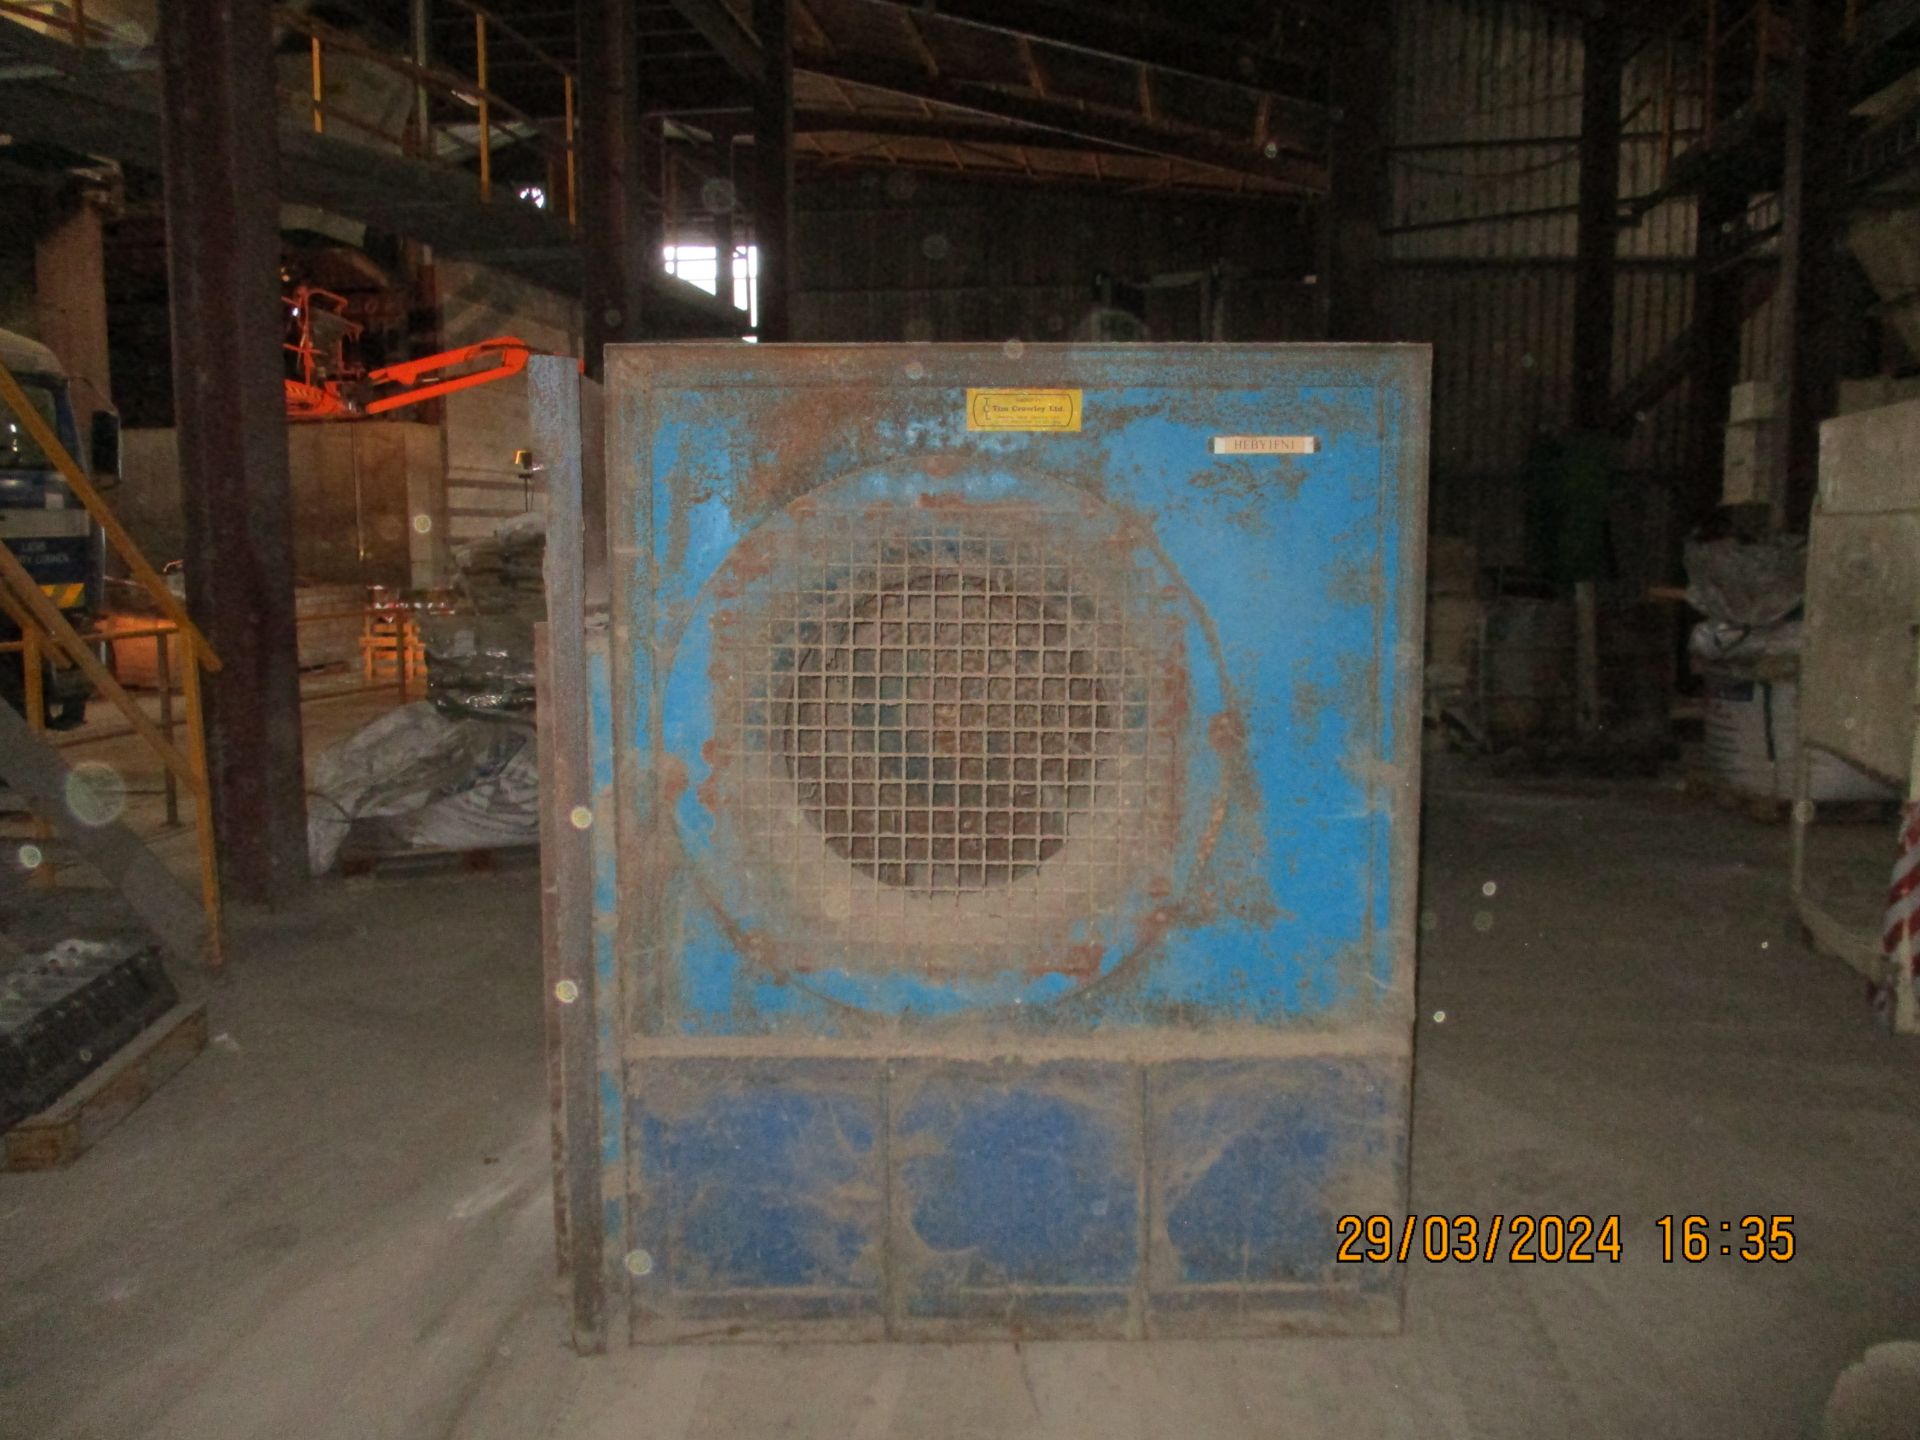 Grain Drying Fan, with 37kW electric motor, loading free of charge - yes, lot located in Rath, Birr, - Image 2 of 3